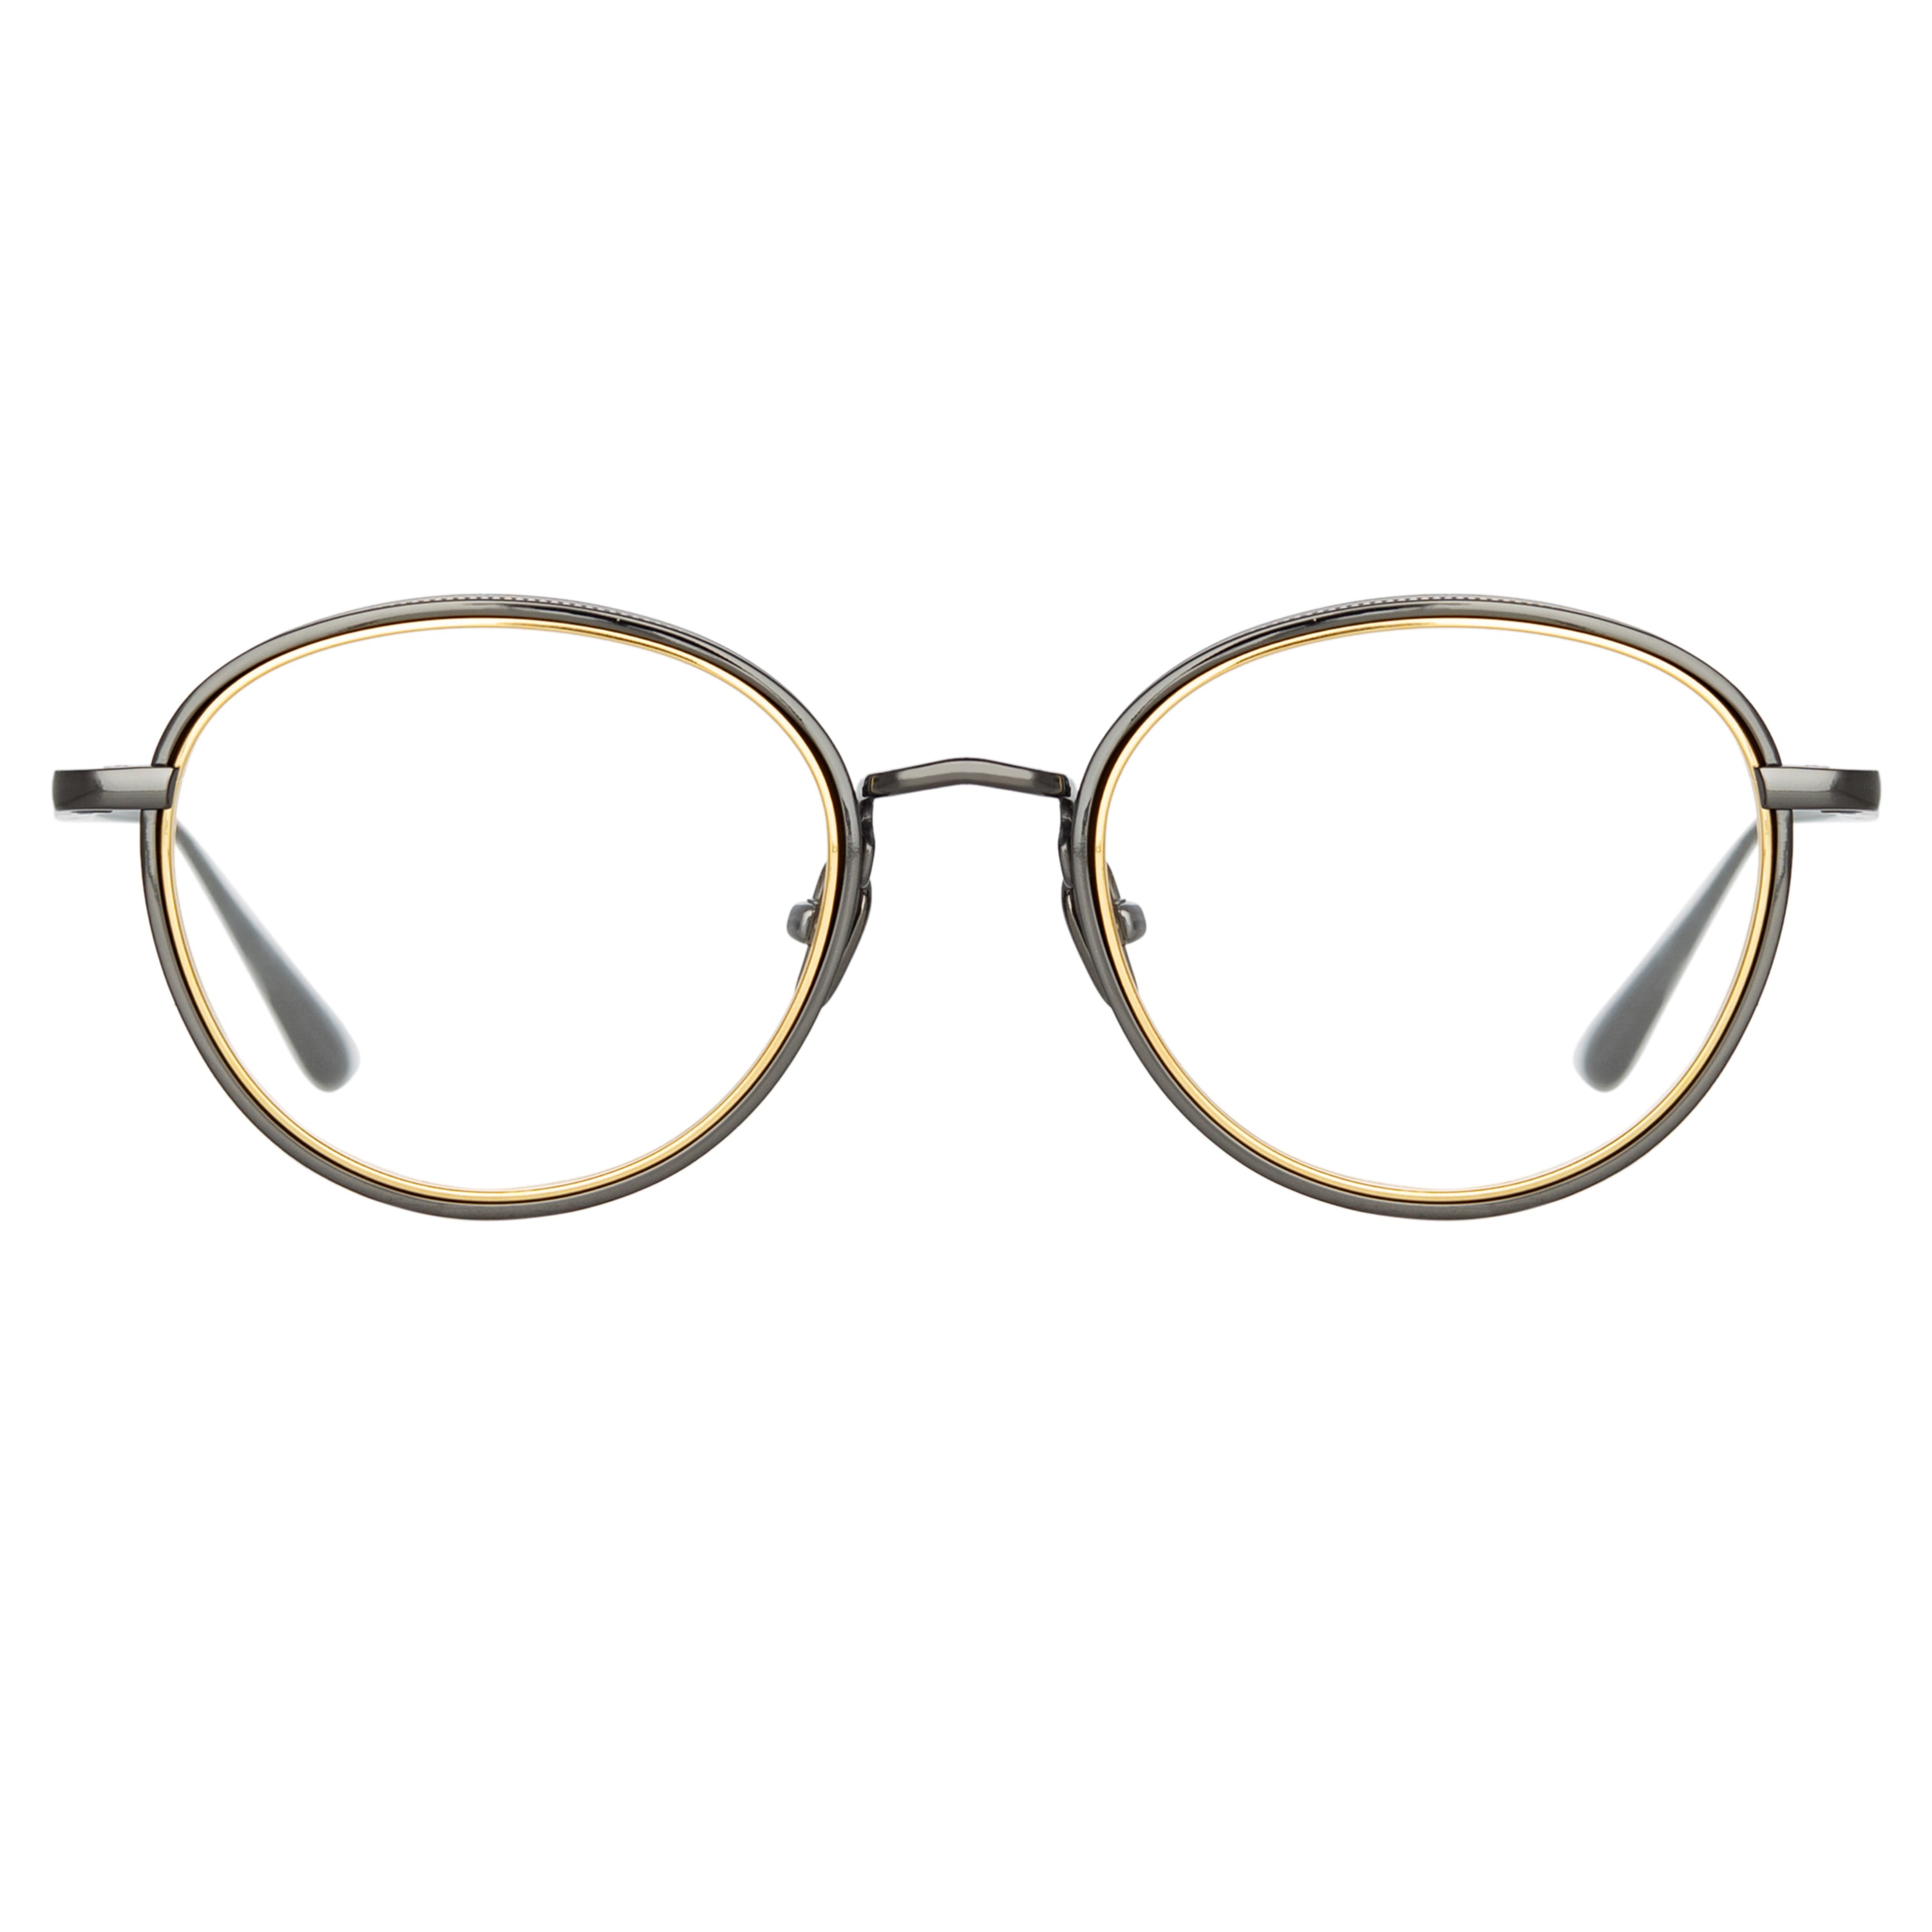 Moss Oval Optical Frame in Nickel